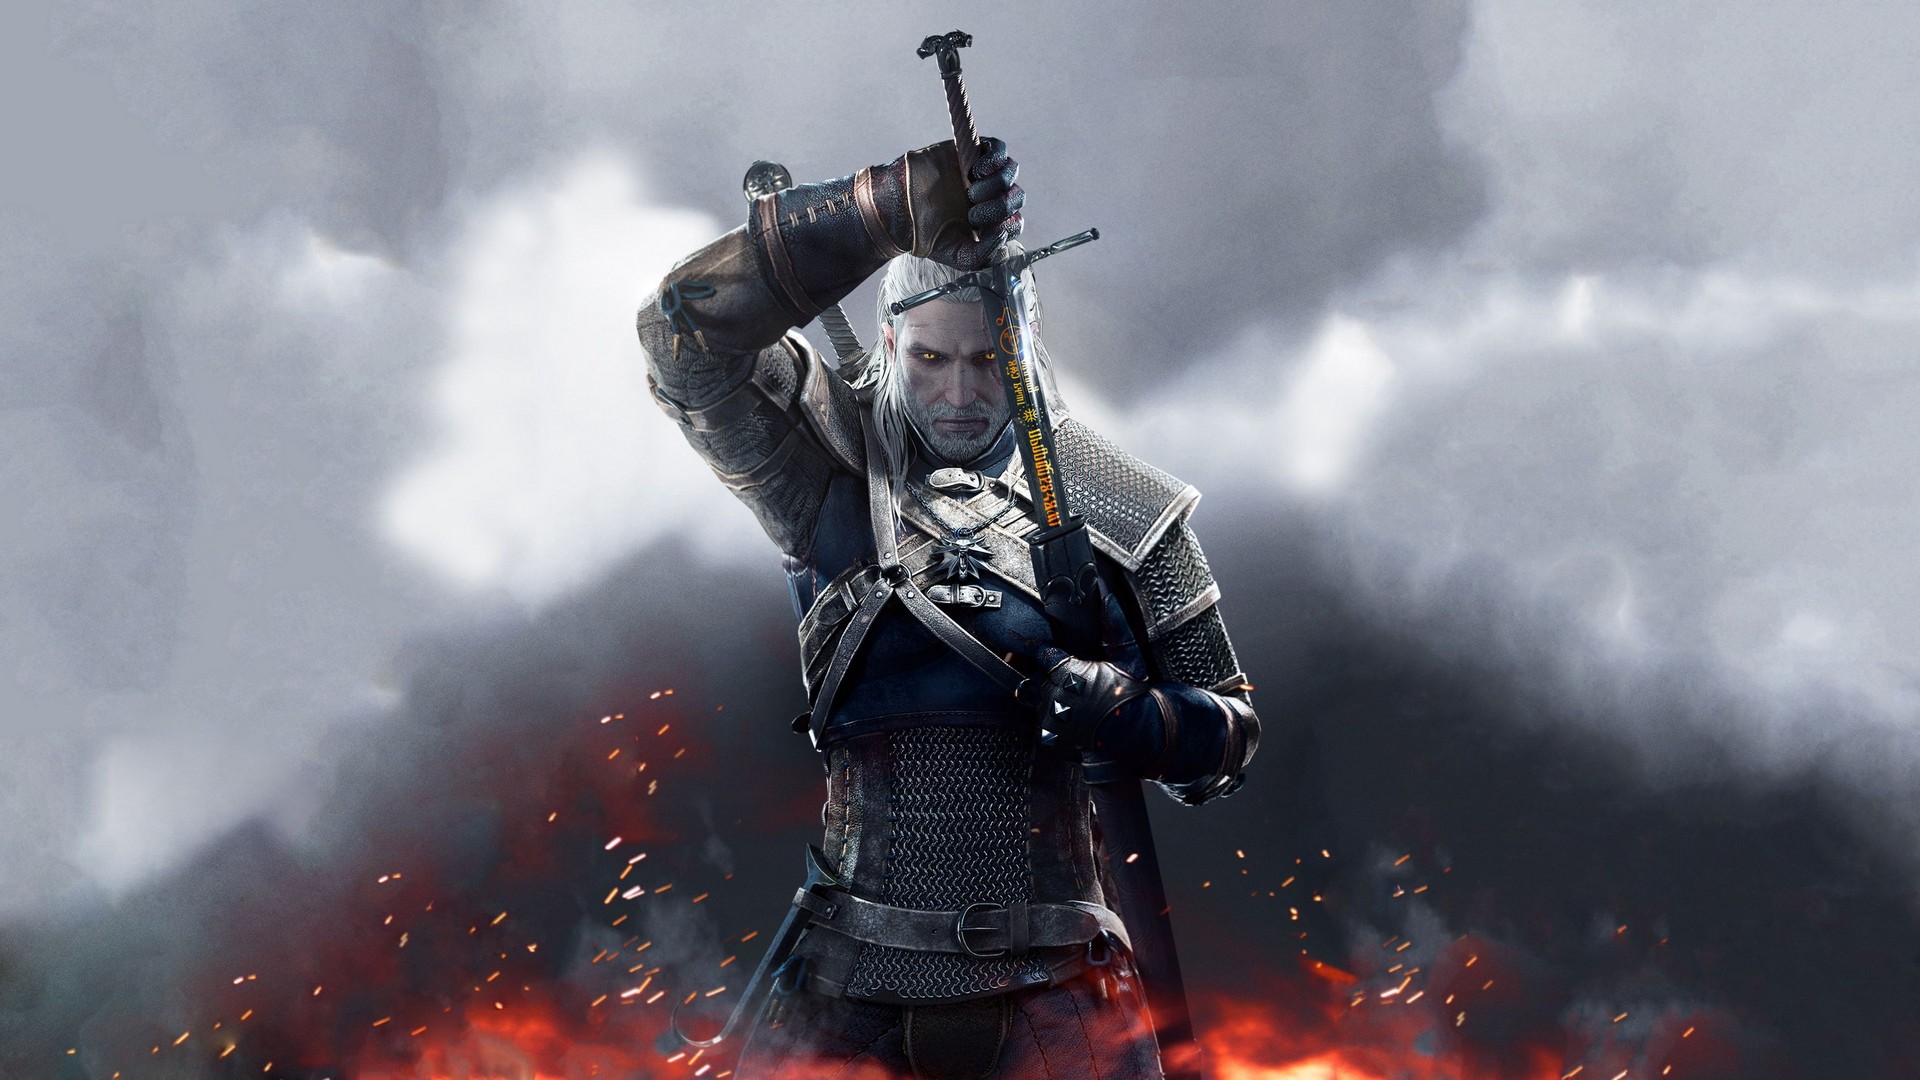 Best The Witcher Wallpaper HD With high-resolution 1920X1080 pixel. You can use this wallpaper for your Desktop Computer Backgrounds, Mac Wallpapers, Android Lock screen or iPhone Screensavers and another smartphone device